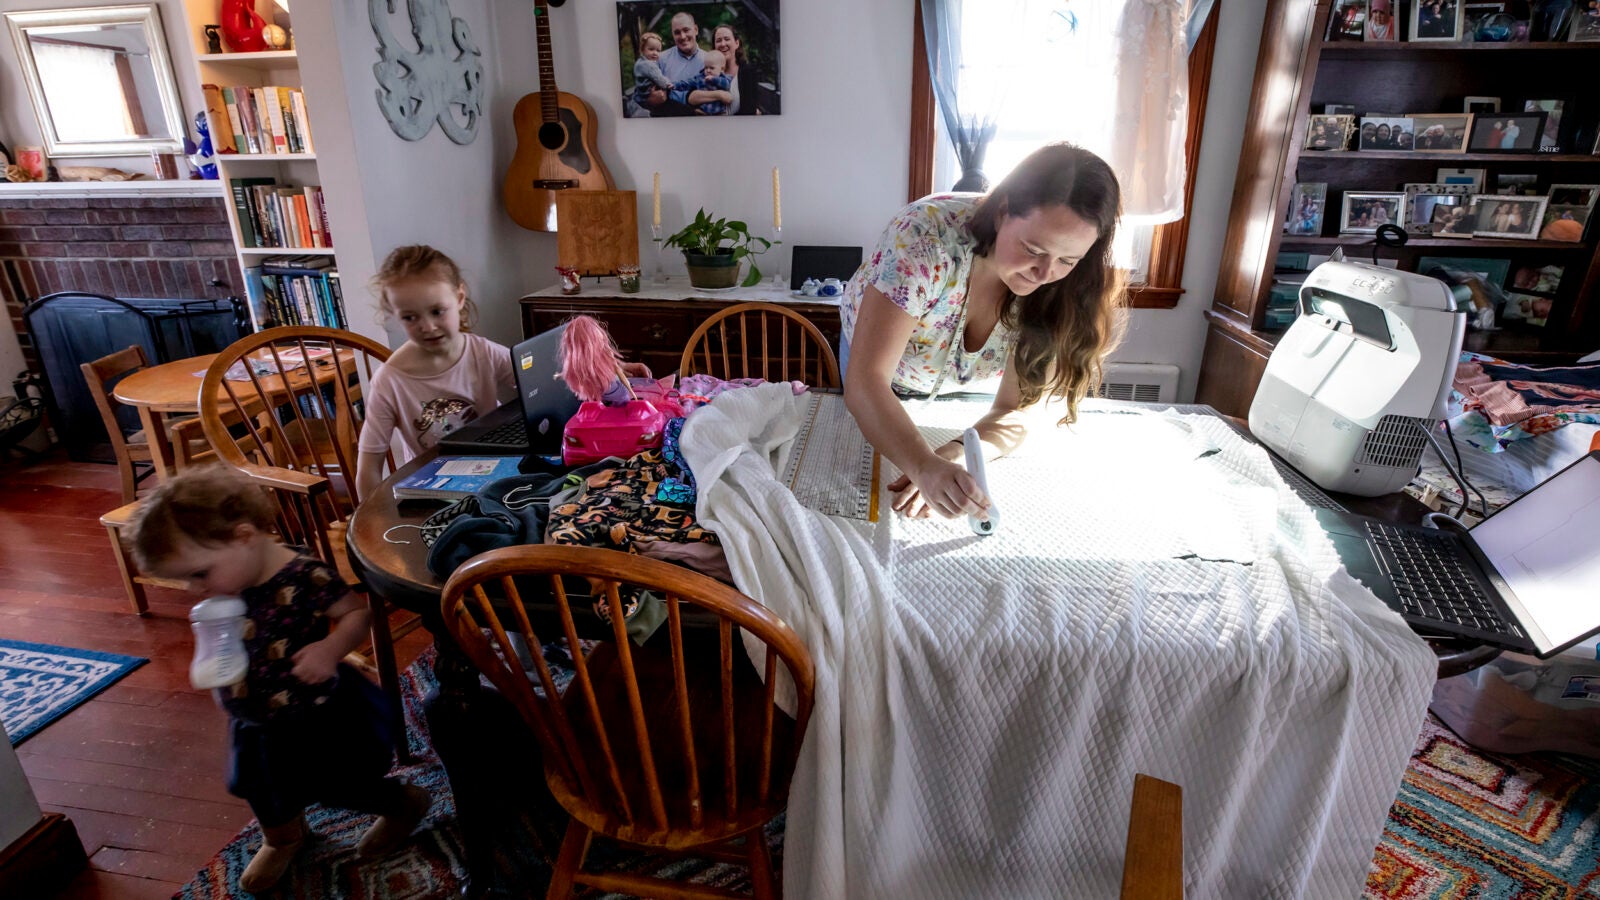 Kate Pease with daughters Ella and Coraline works on fabric arts in her dining room.